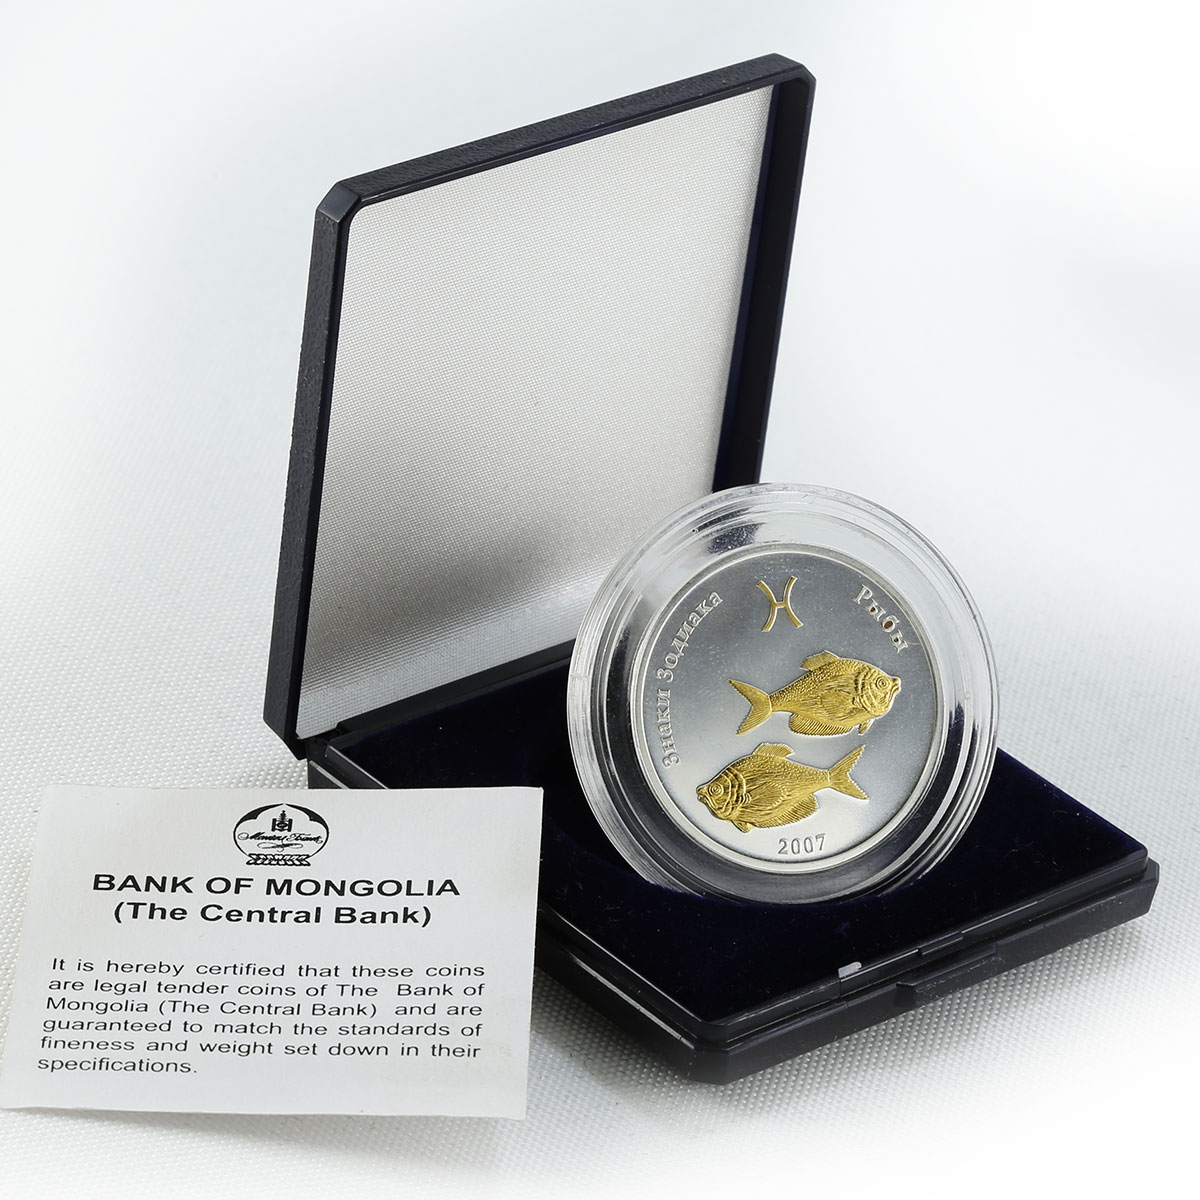 Mongolia 250 tugriks Pisces Zodiac fishes silver gilded 1/2 oz coin 2007